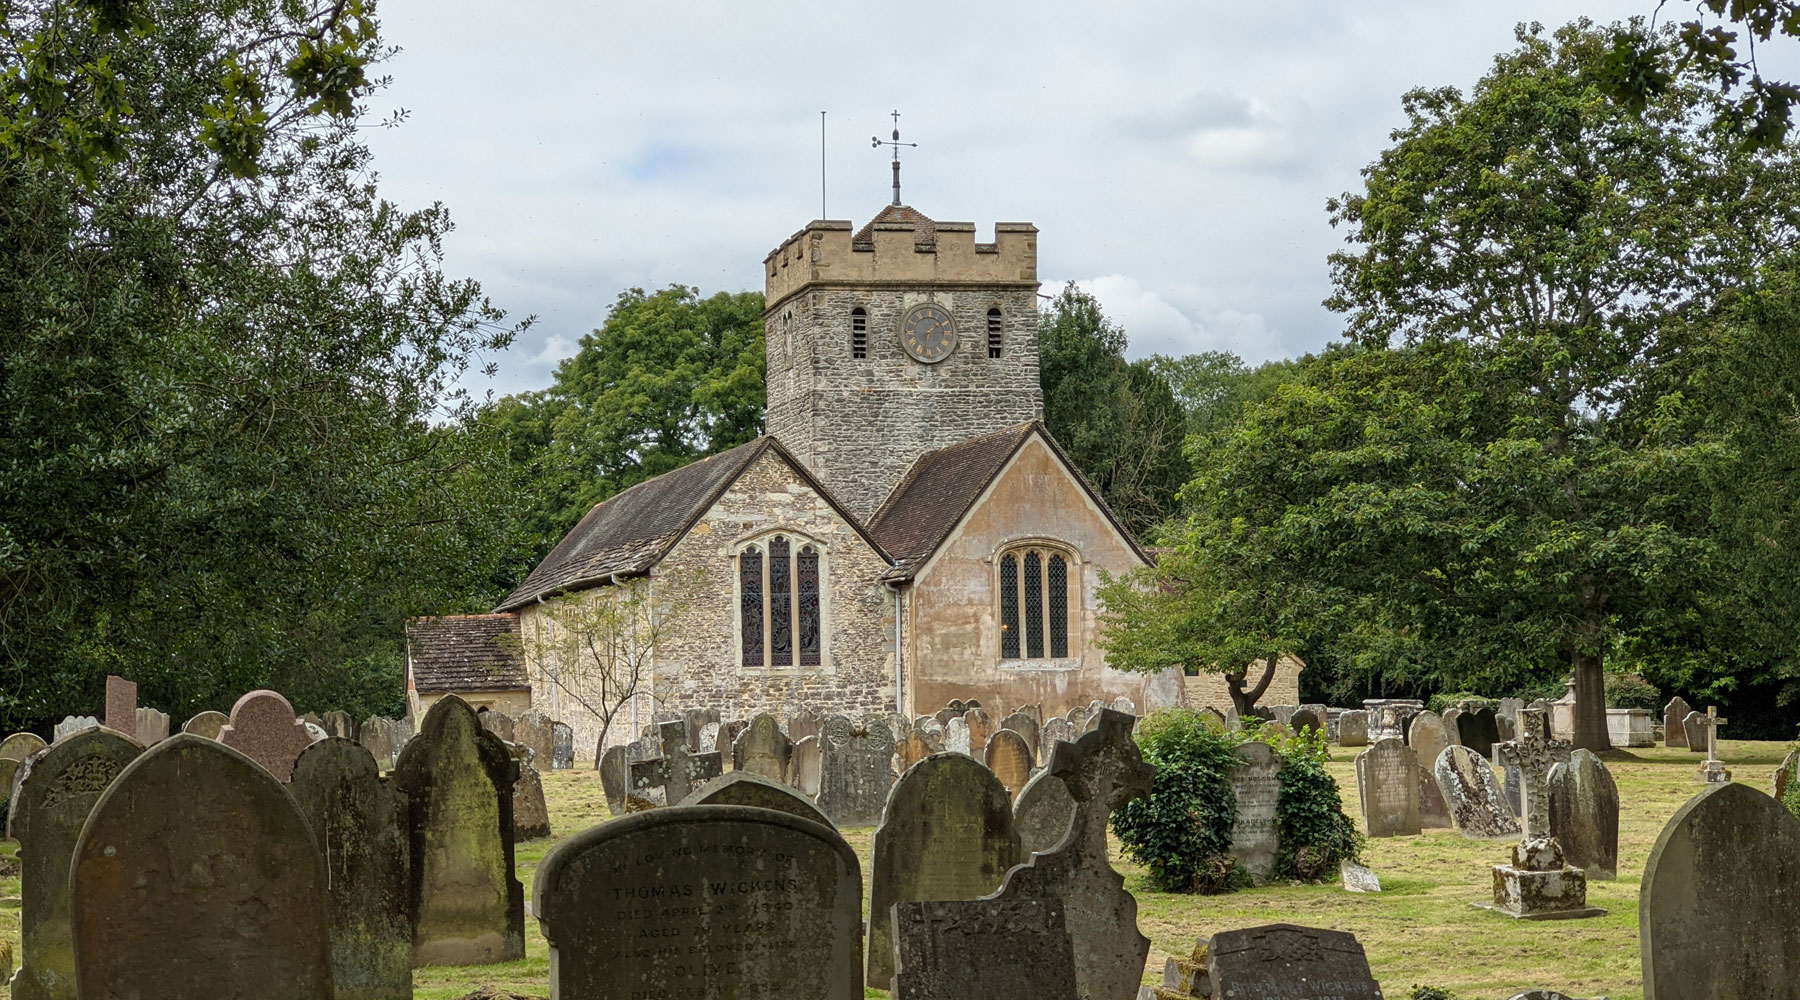 See the 700-years old murals of St Nicholas Church, Charlwood